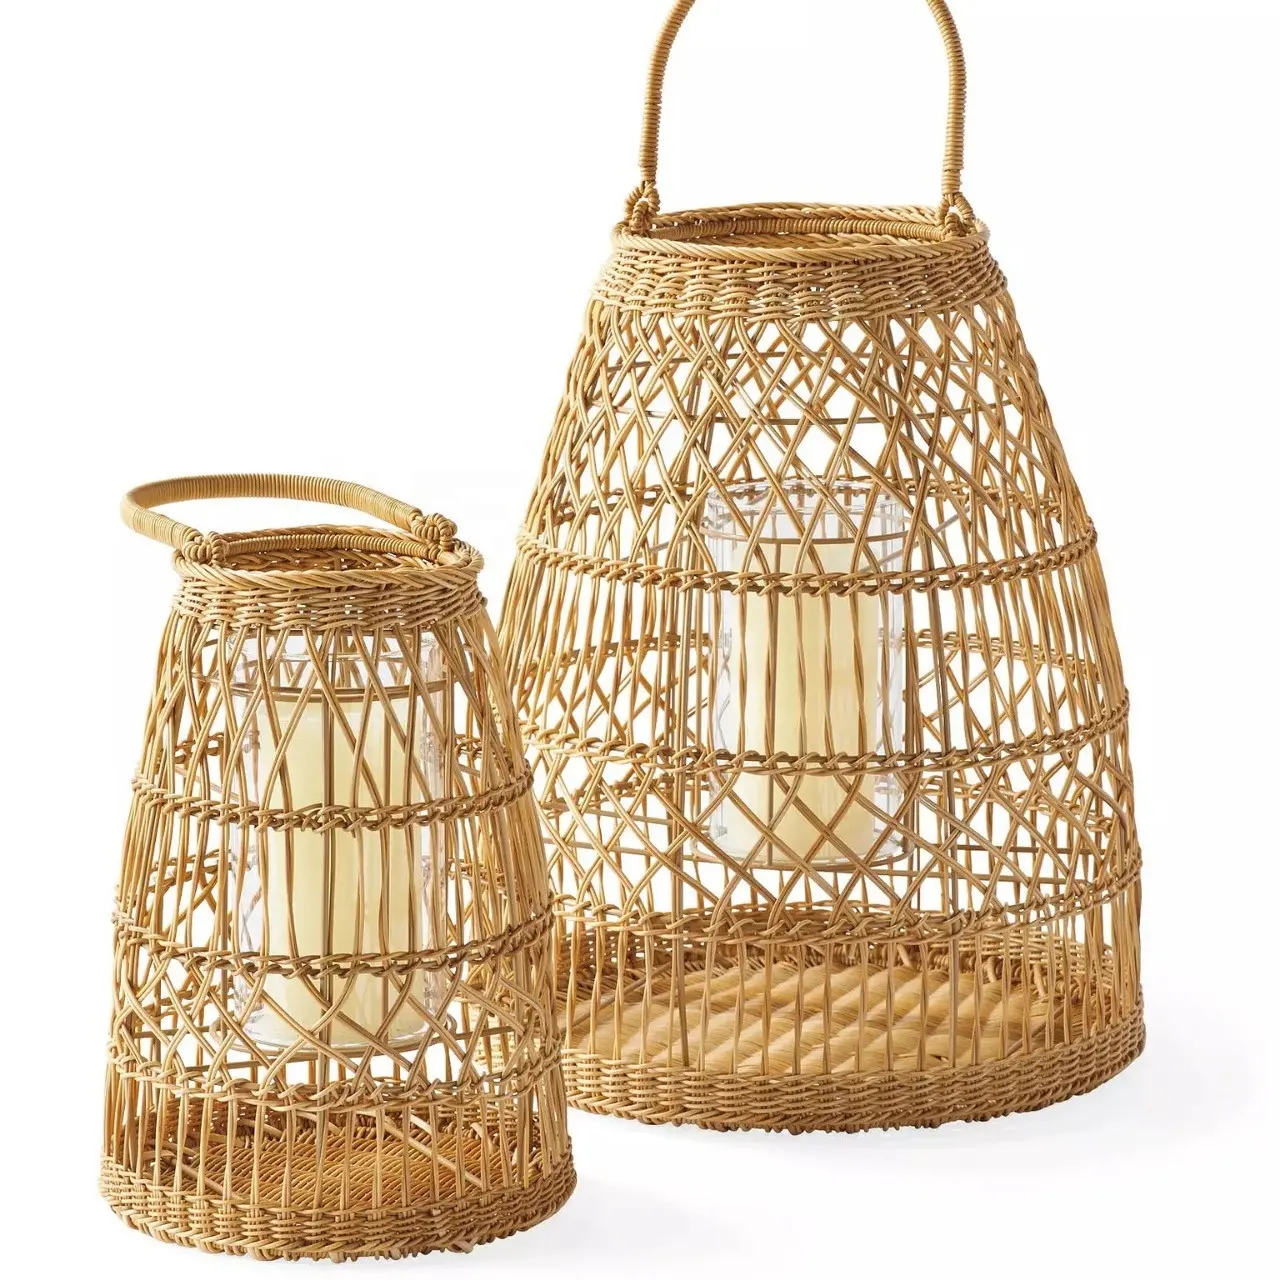 Creative rattan style candlestick floor hanging ornaments decorative lamps pastoral style candle lamp